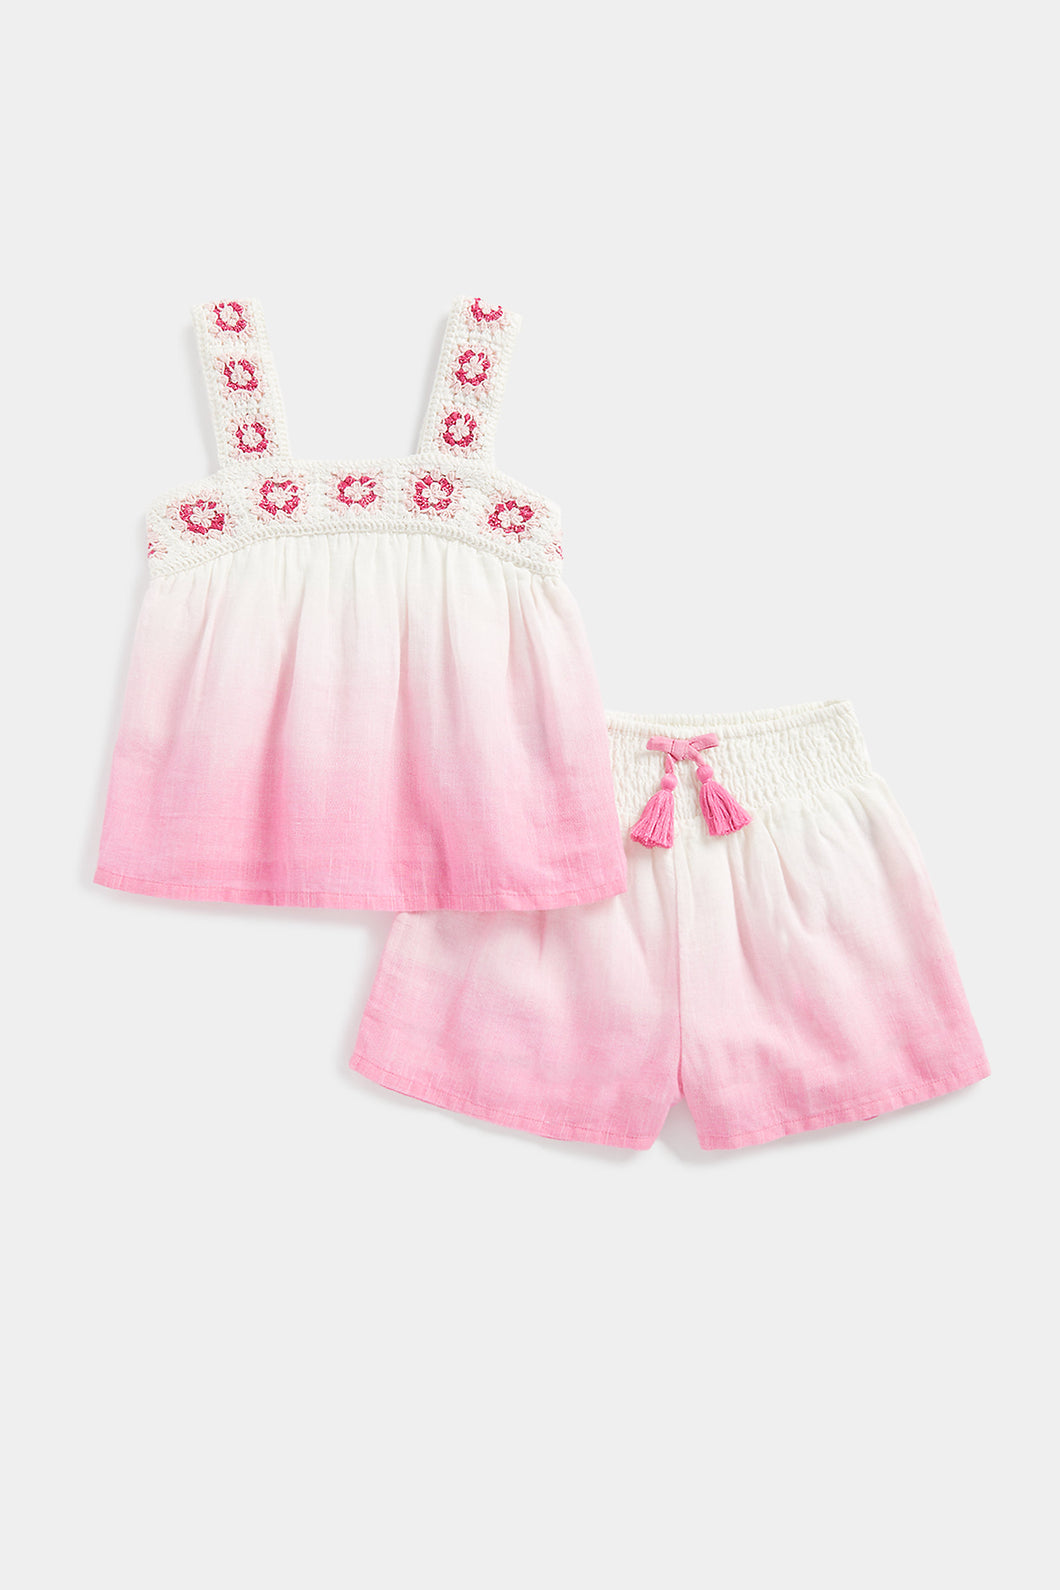 Mothercare Ombre Top and Shorts Set